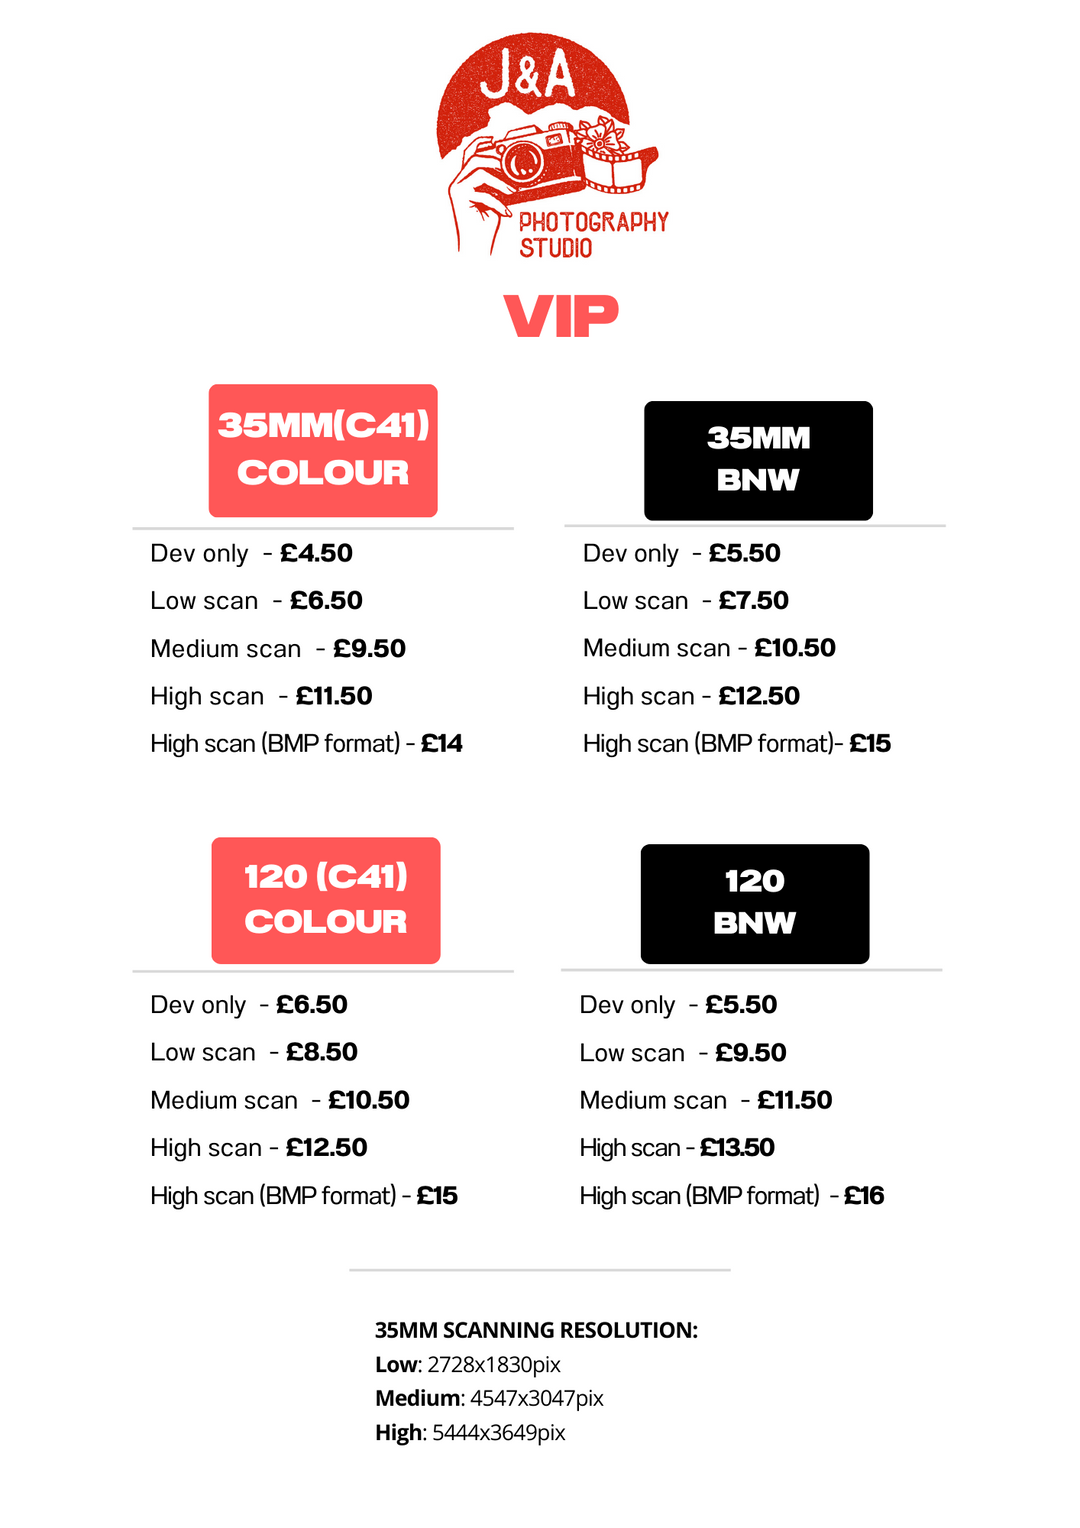 VIP Price list for film processing - J&A Photography Studio.png